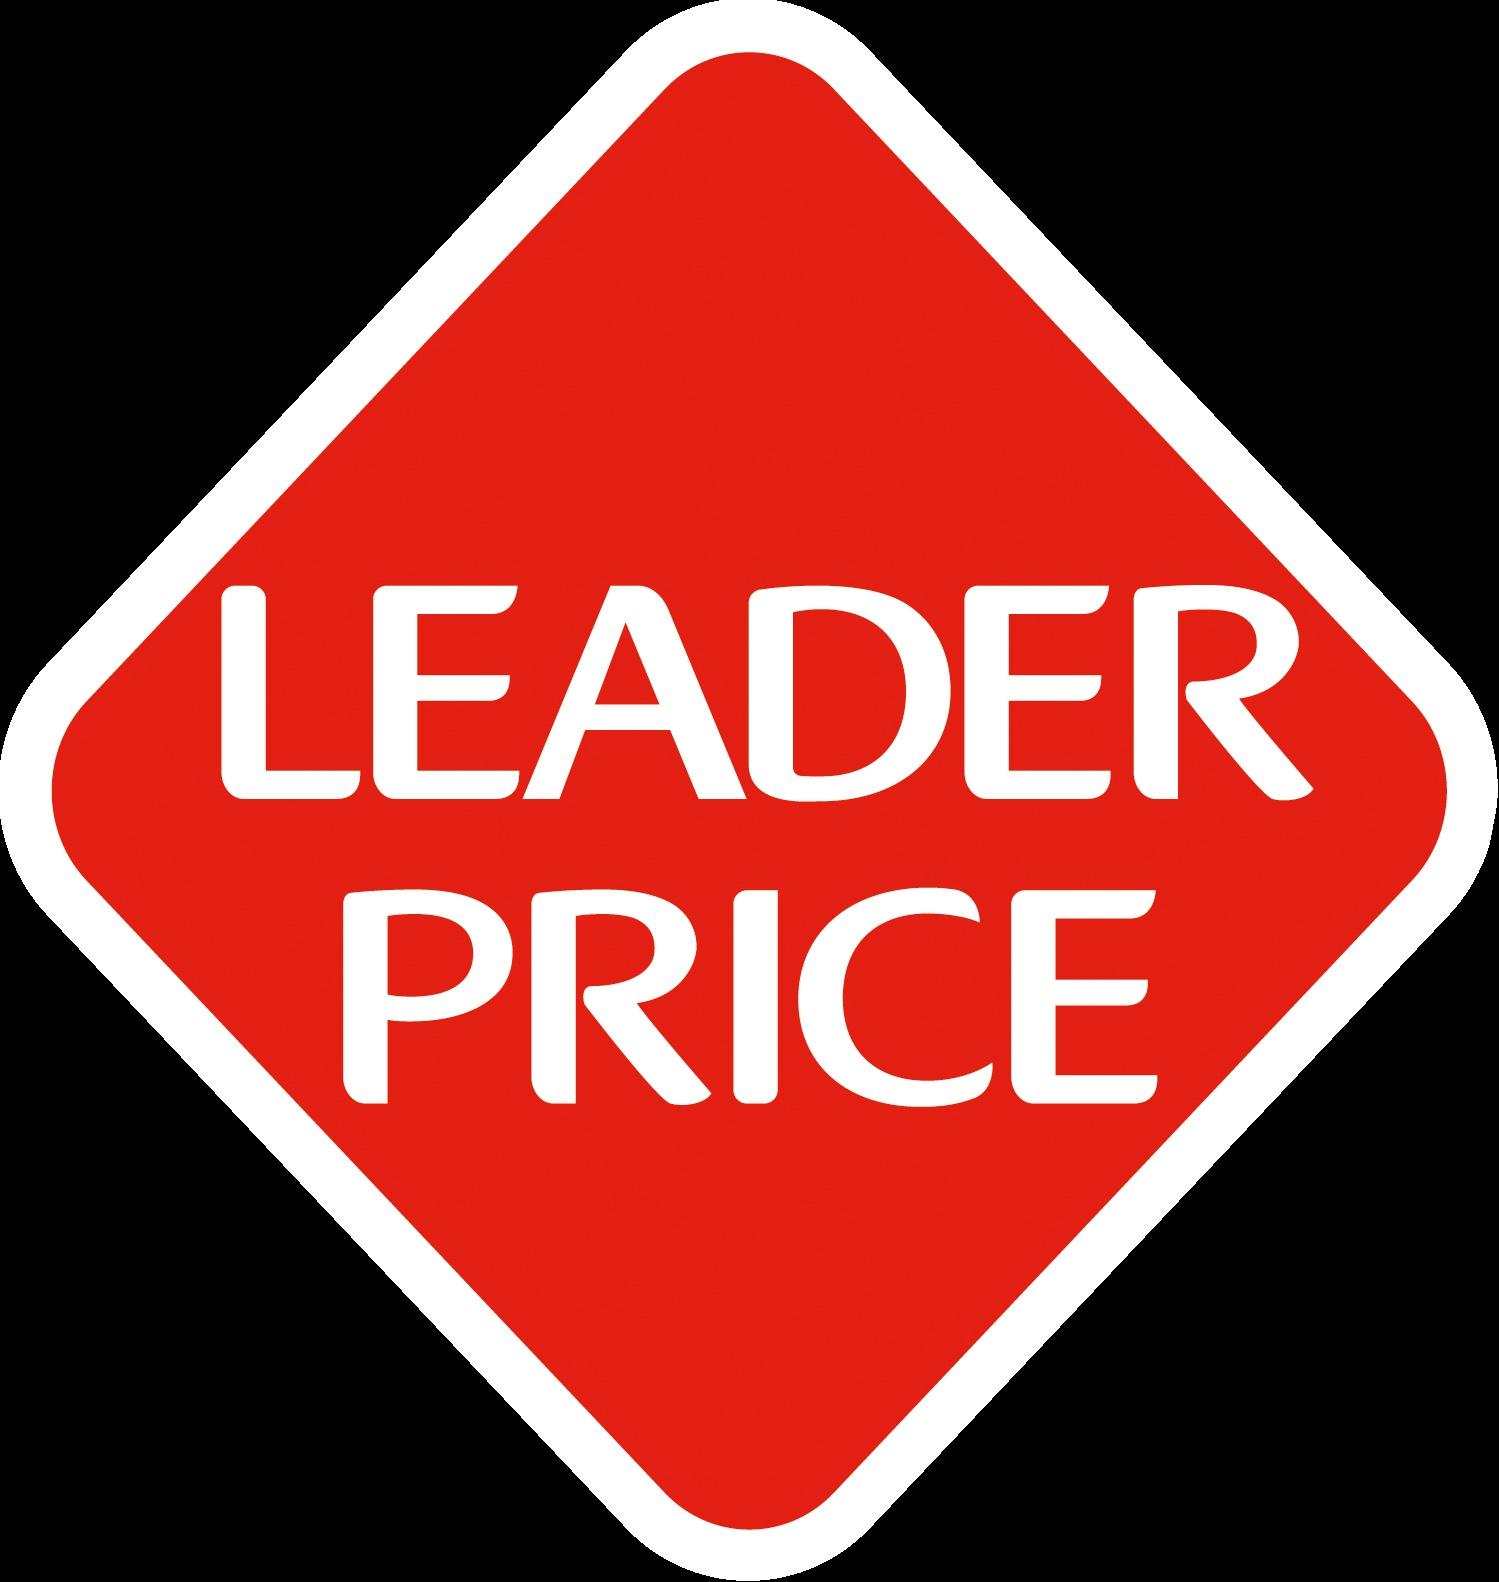 Leader Price Le Tampon